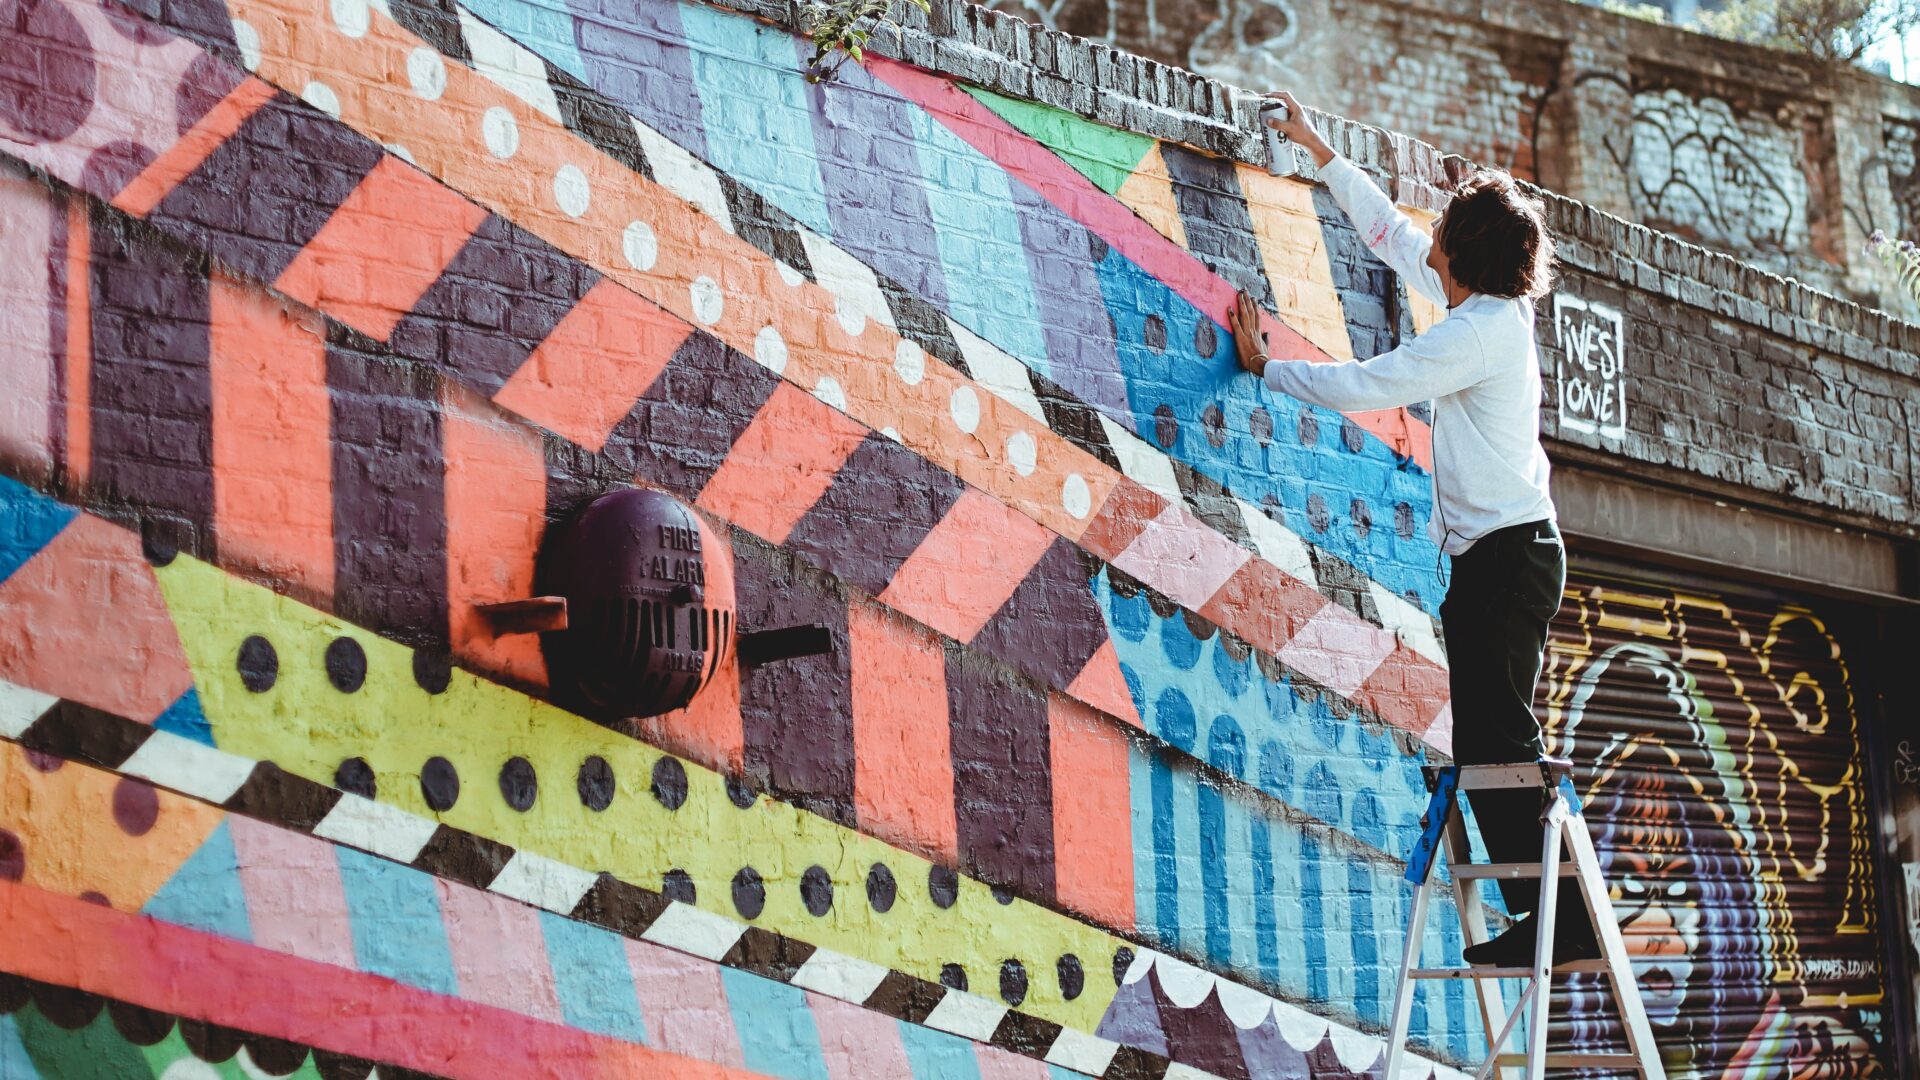 Graffiti wall, with person standing on ladder and reaching over the wall. Photo by Abi Ismail